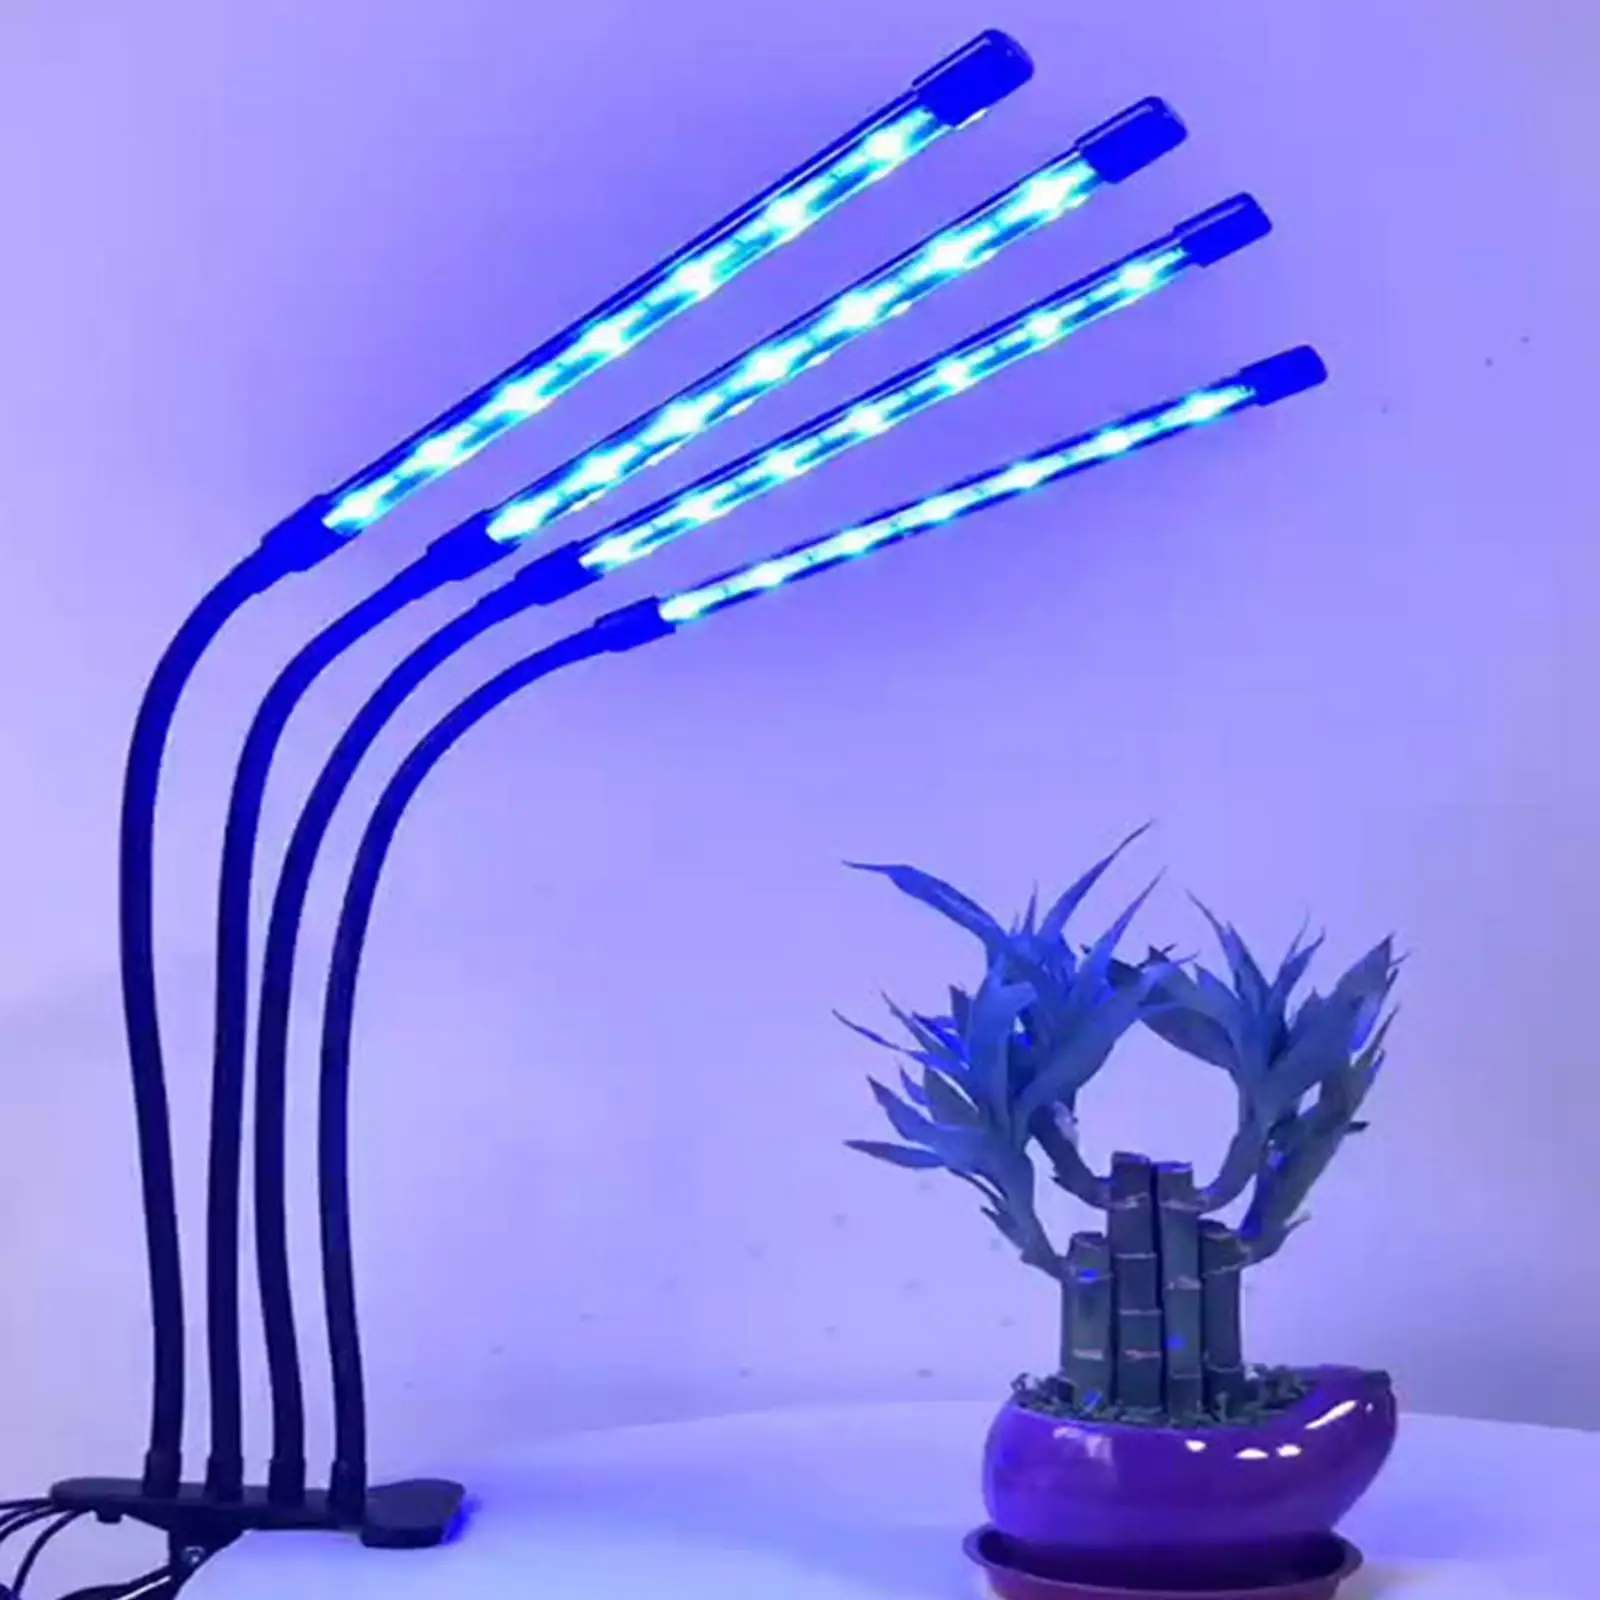 LED Grow Light Auto Off Timing 3 9 12Hrs 3 Modes Plant Light Plant Lamp for Greenhouse Gardening Seedling Vegetables Flowers